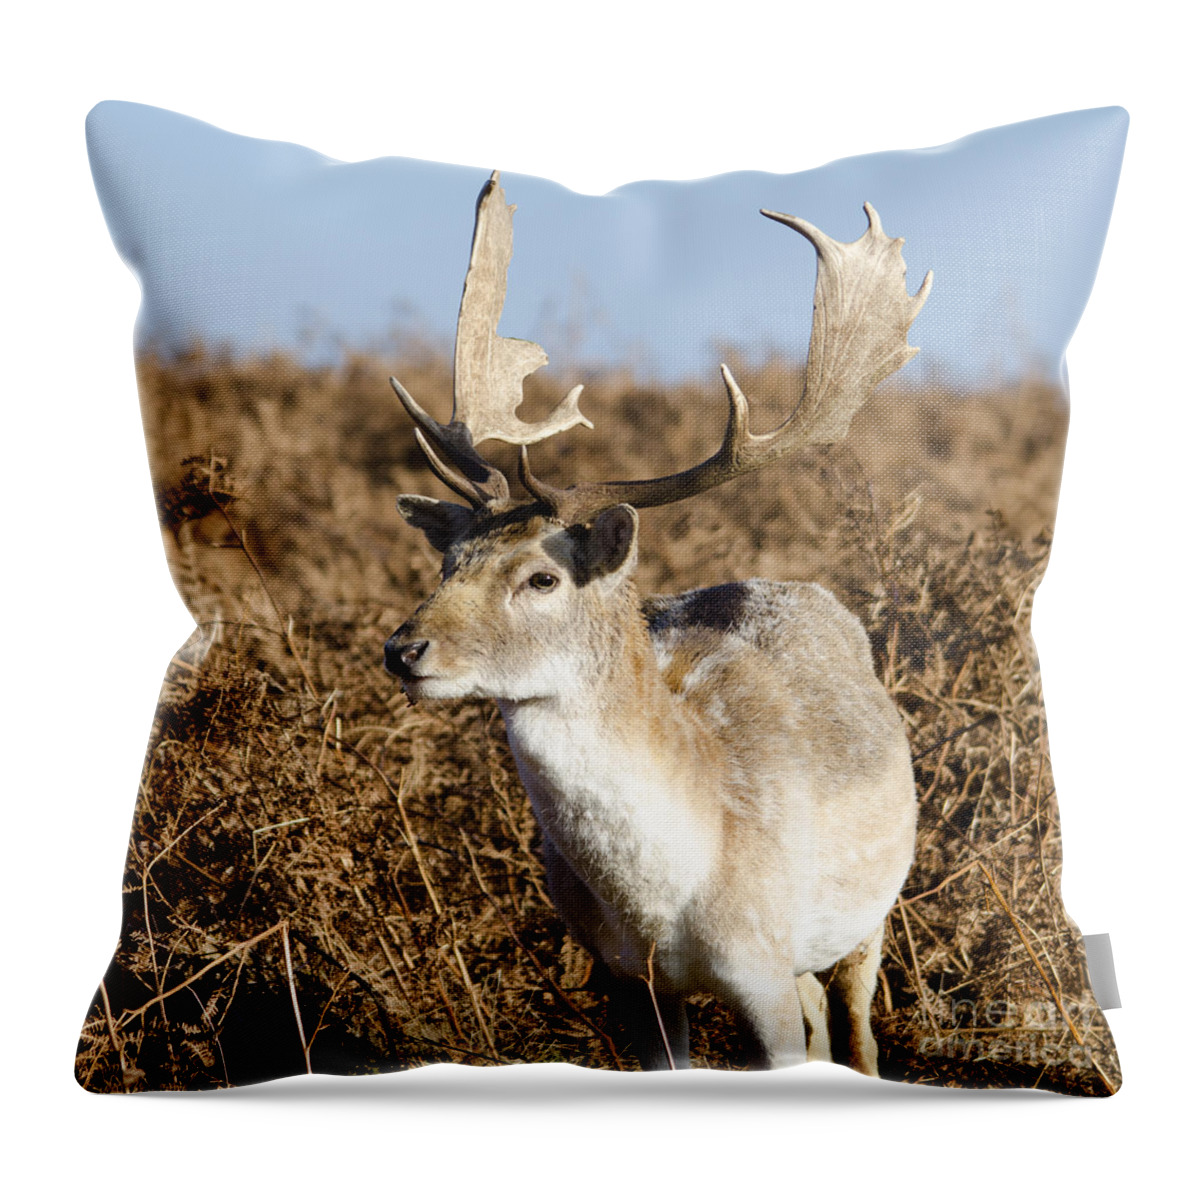 Deer Throw Pillow featuring the photograph Deer by Steev Stamford